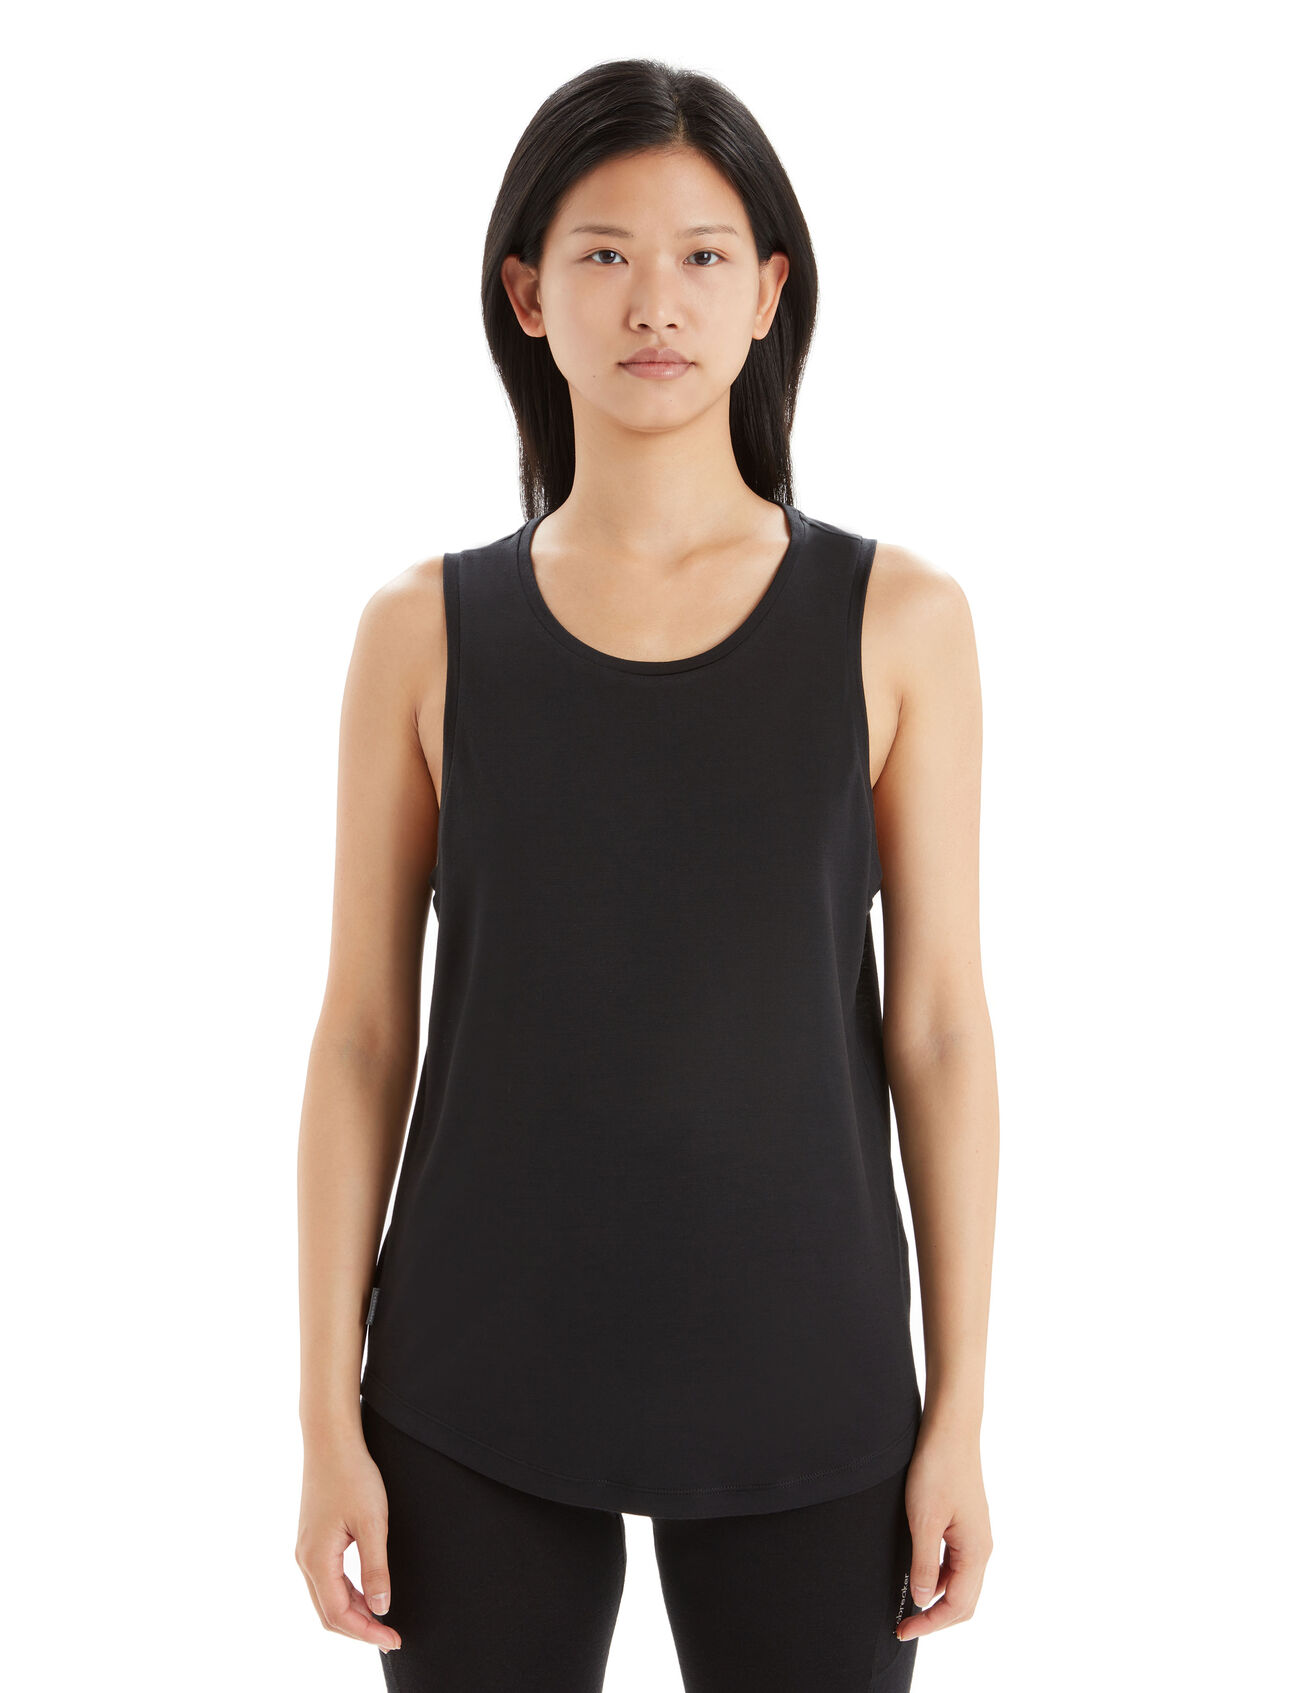 Womens Merino Sphere II Tank A soft merino-blend top made with our lightweight Cool-Lite™ jersey fabric, the Sphere II Tank provides natural breathability, odor resistance and comfort.